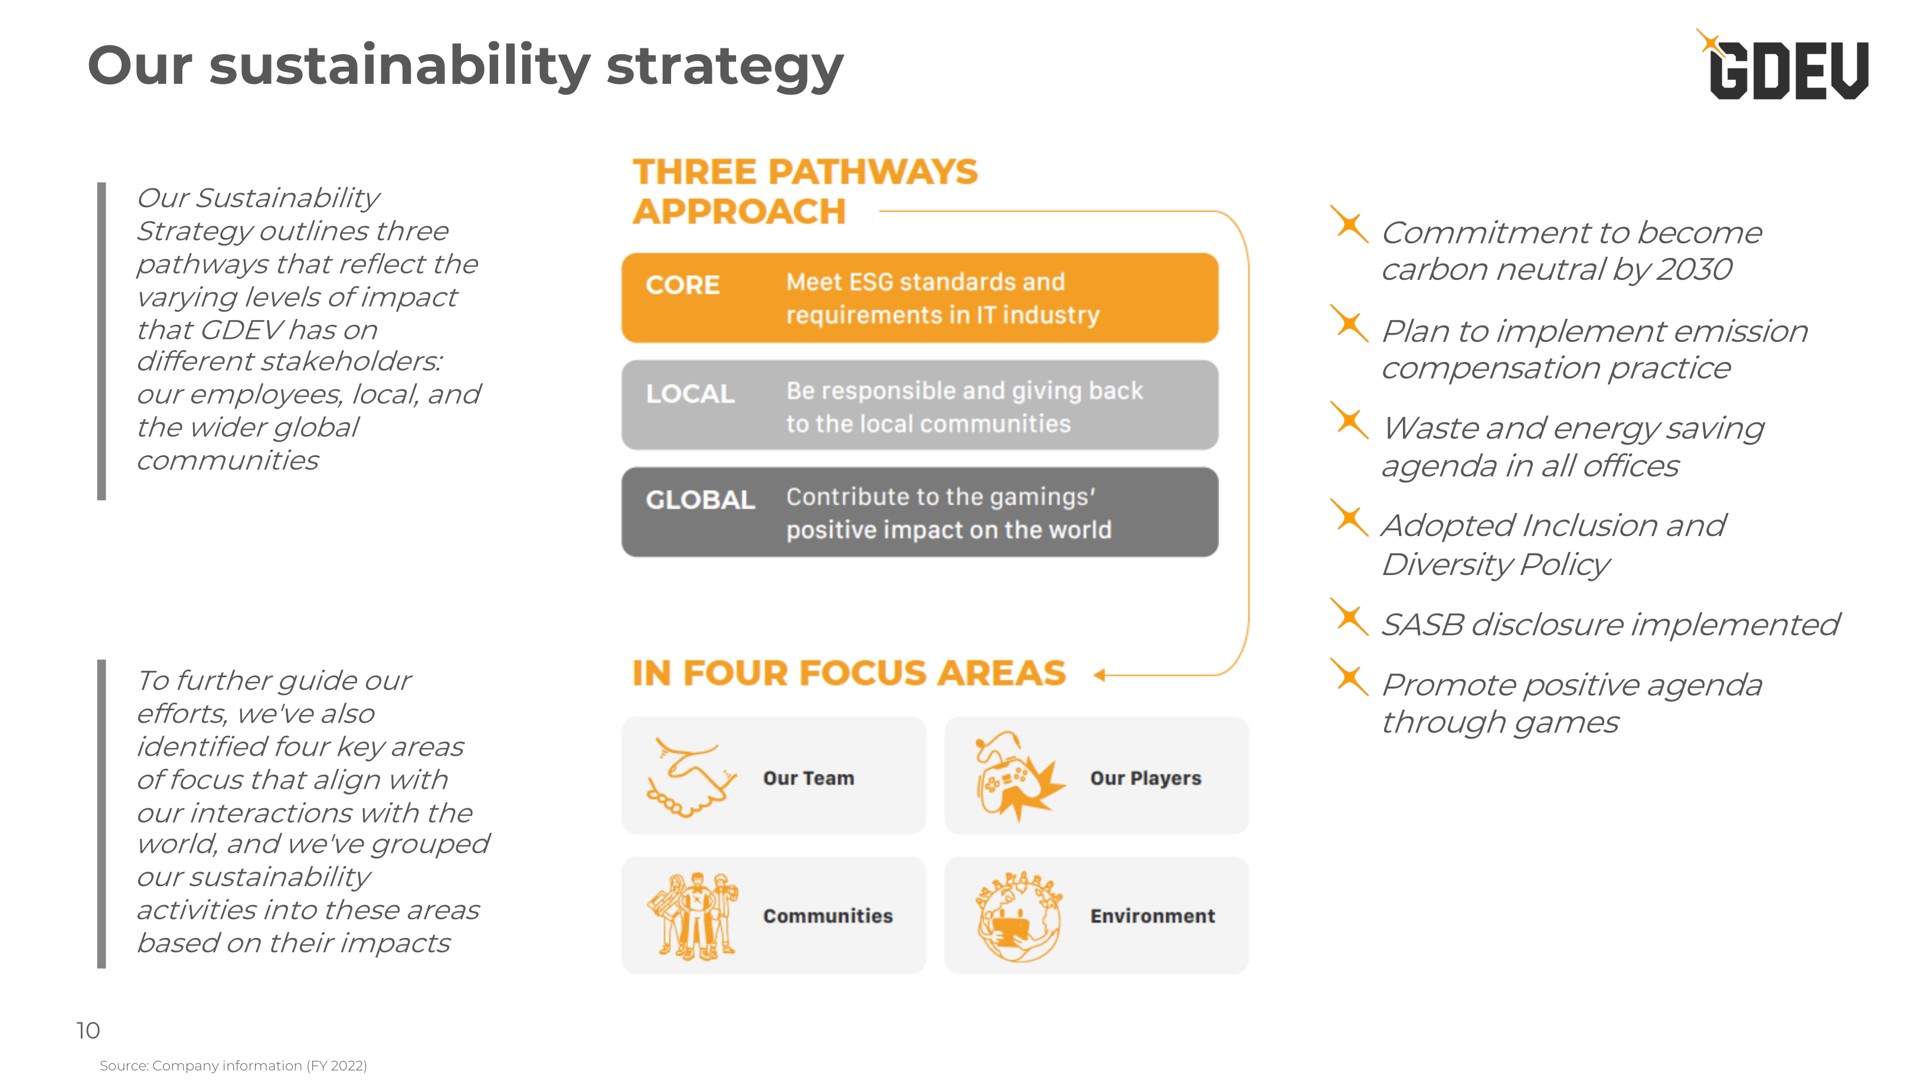 our strategy commitment to become carbon neutral by plan to implement emission compensation practice waste and energy saving agenda in all offices adopted inclusion and diversity policy disclosure implemented promote positive agenda through games three pathways approach four focus areas | Nexters